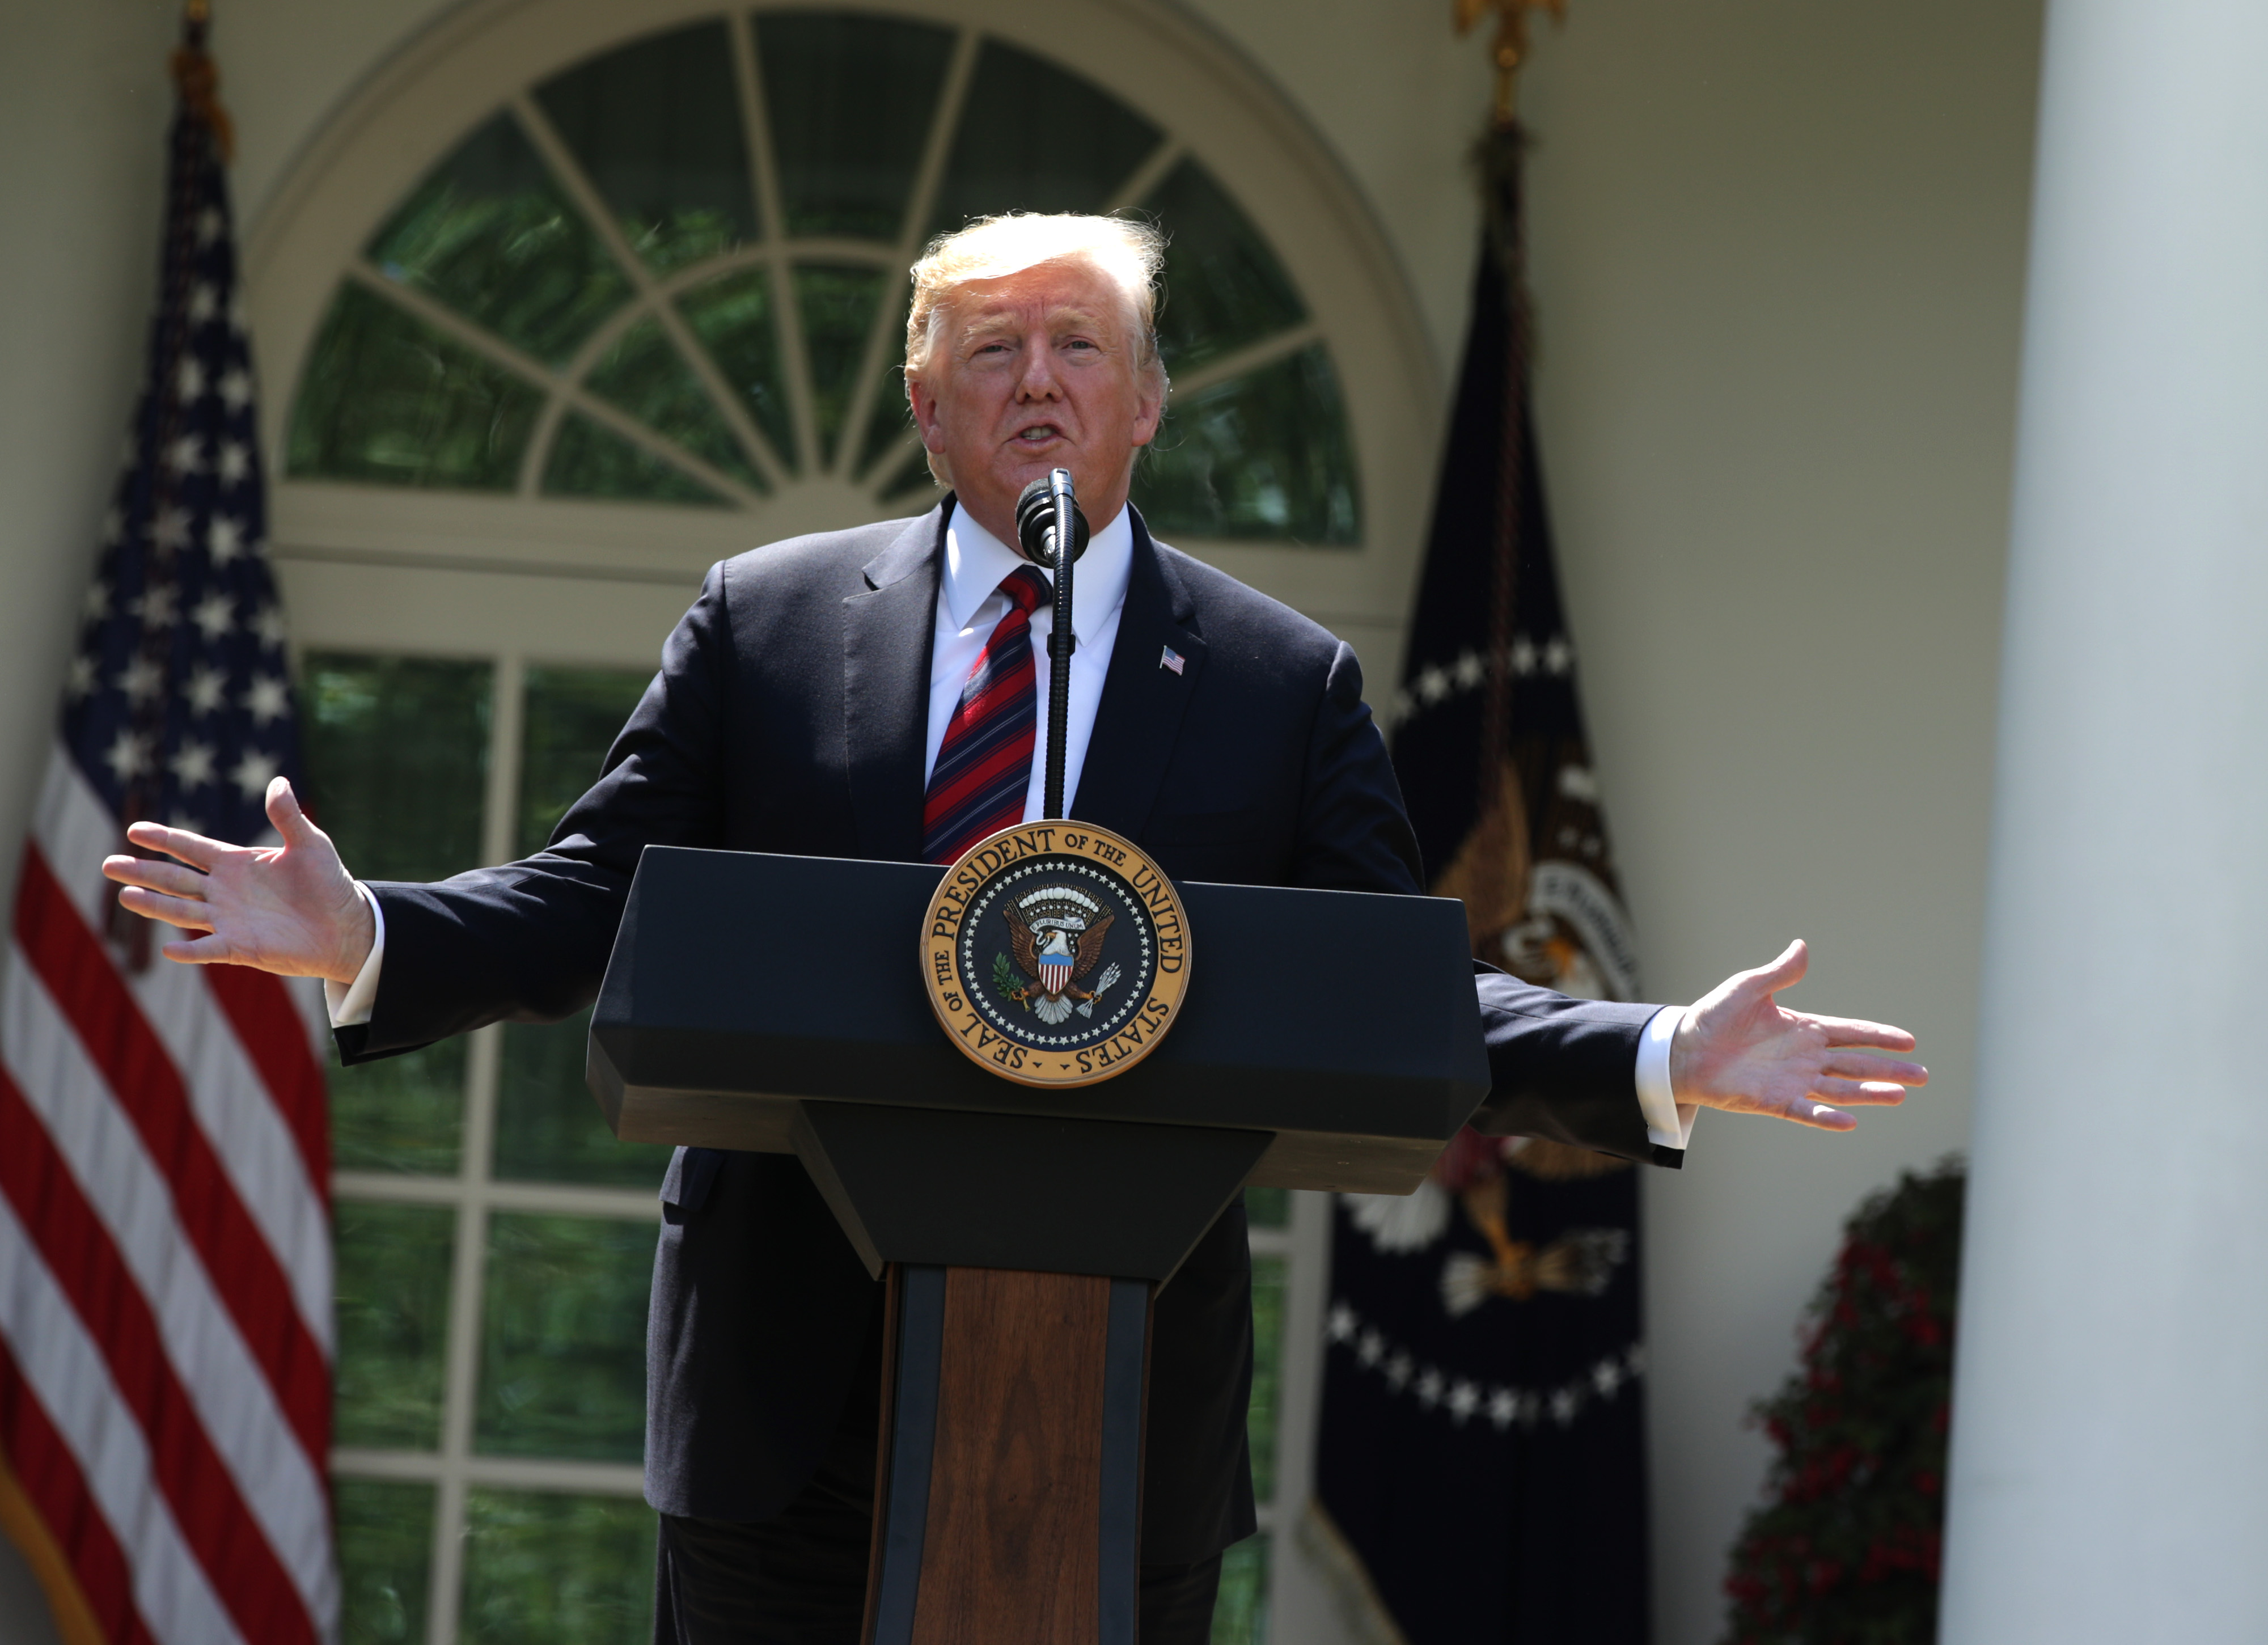 WASHINGTON, DC - MAY 16: U.S. President Donald Trump speaks about immigration reform in the Rose Garden of the White House on May 16, 2019 in Washington, DC. President Trump’s new immigration proposal will be a “merit-based system” that prioritizes high-skilled workers over those with family already in the country and does not address young undocumented immigrants that are part of the Deferred Action for Childhood Arrivals (DACA) program. (Photo by Alex Wong/Getty Images)